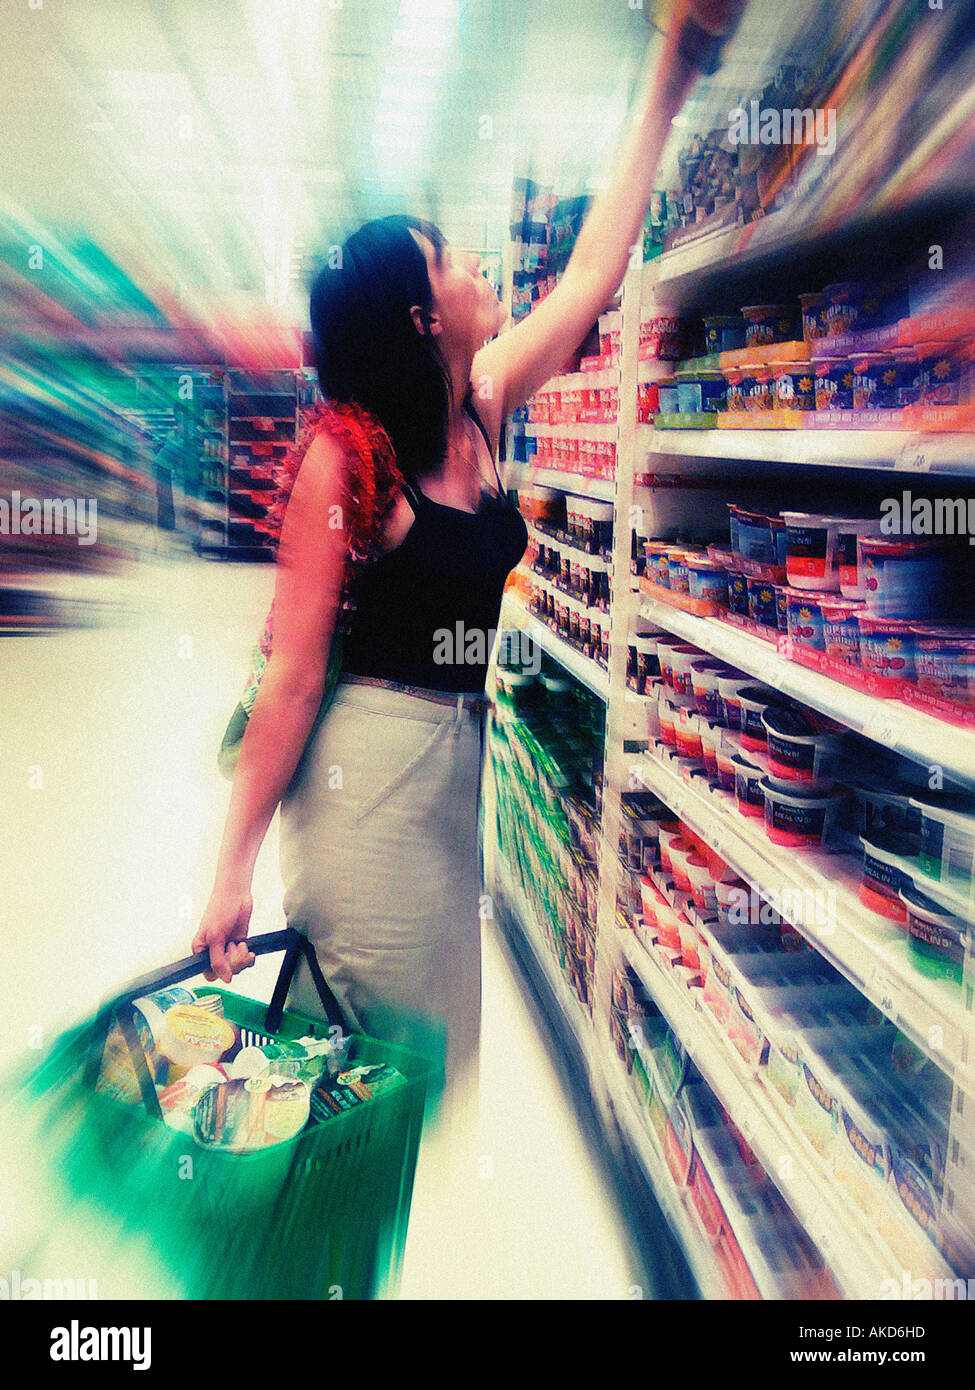 Unidentifiable Caucasian woman carrying a green plastic basket full of shopping in UK Supermarket. Stock Photo